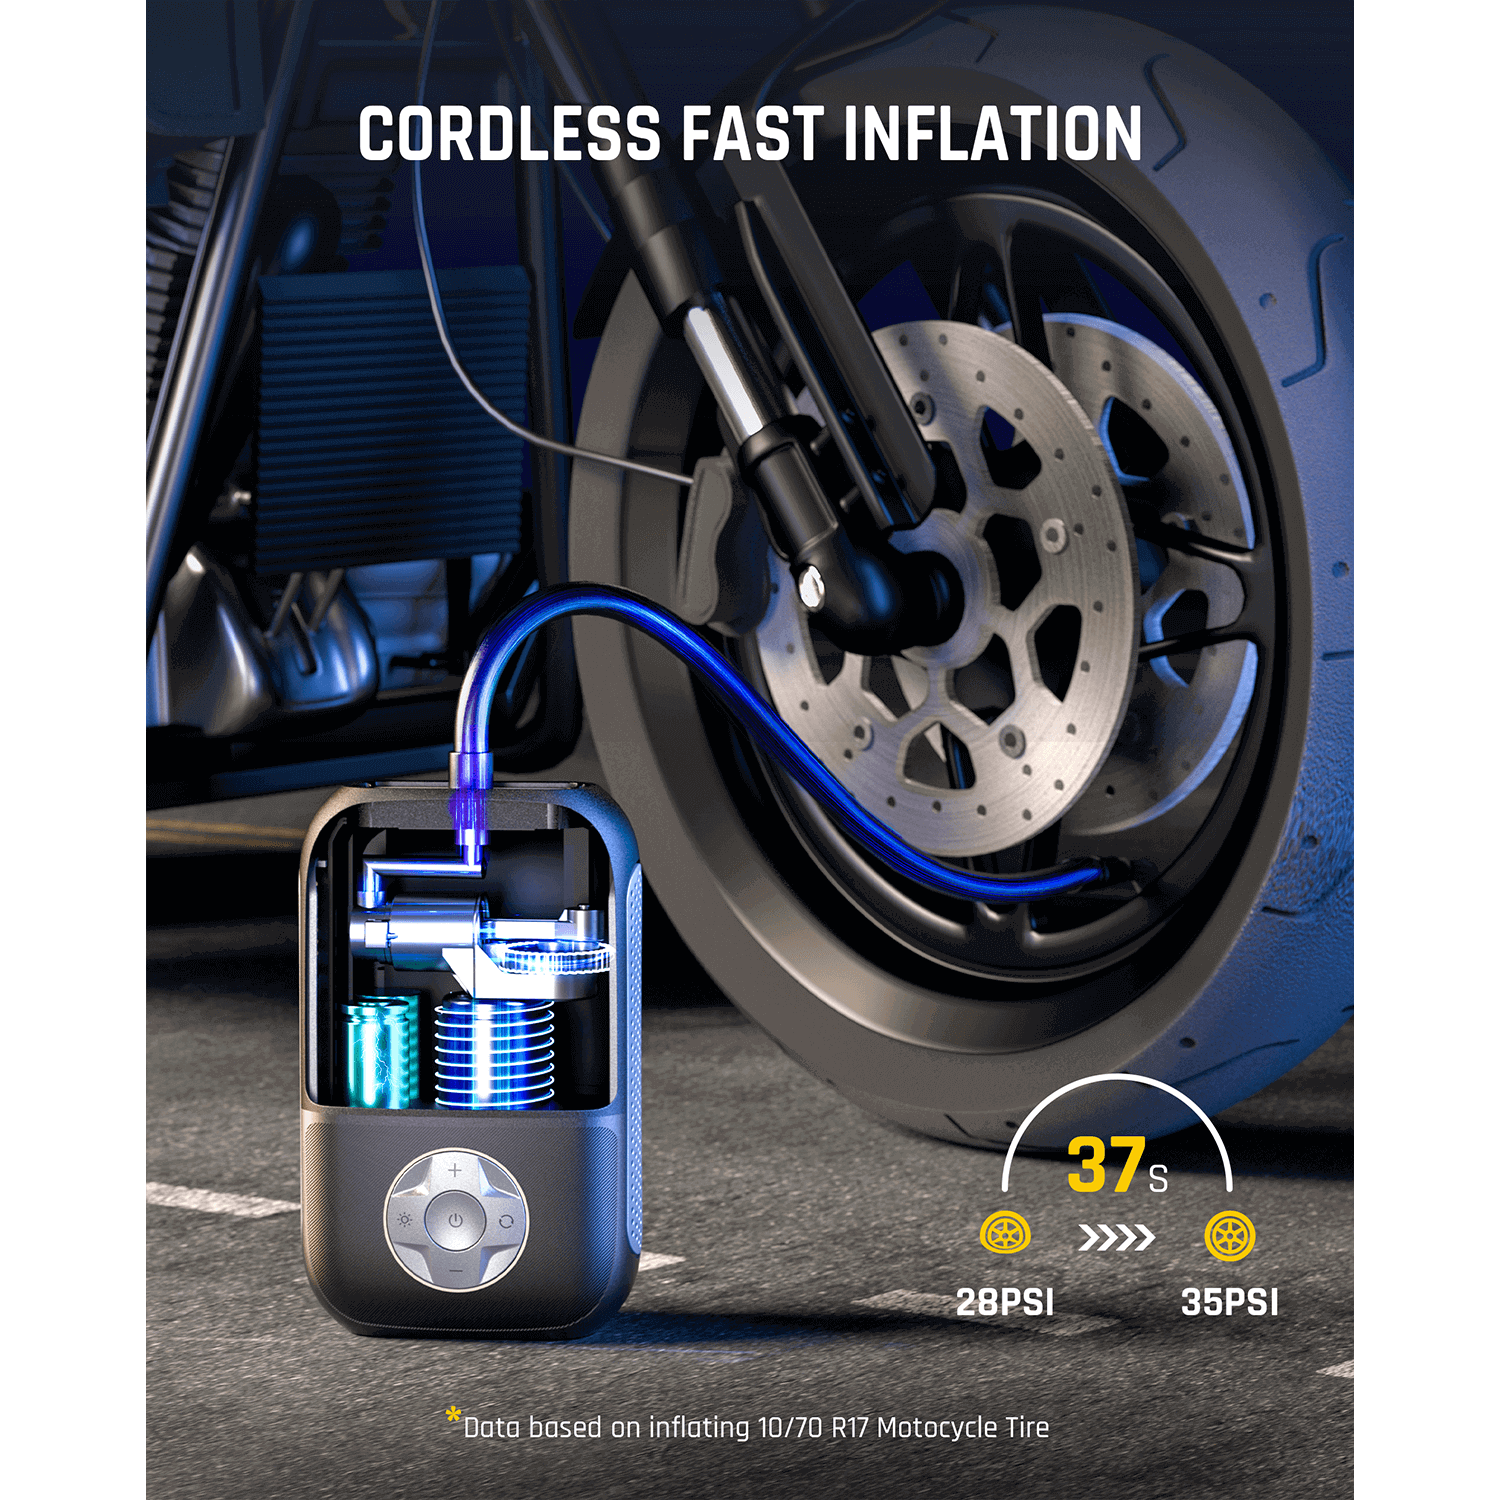  Fanttik X8 Portable Tire Inflator, Lightweight for Motorcycle  tire, Cordless Air Compressor Pump, Rechargeable Battery, 150PSI with  Digital Screen and LED for E-Bike, Bicycle, Car : Automotive